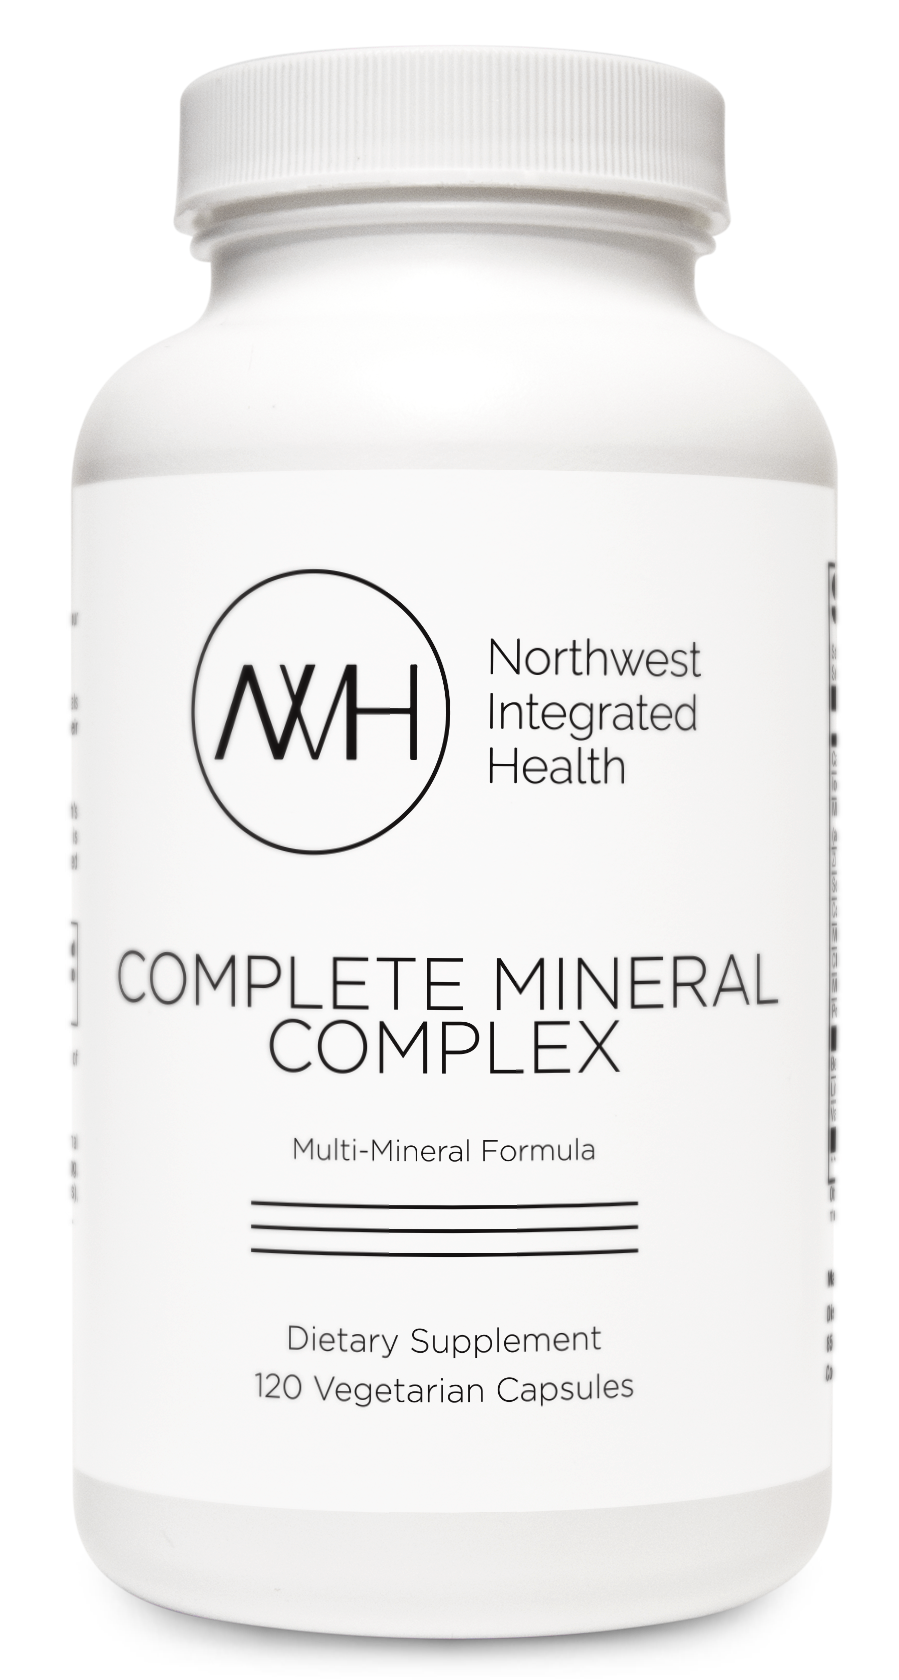 COMPLETE MINERAL COMPLEX